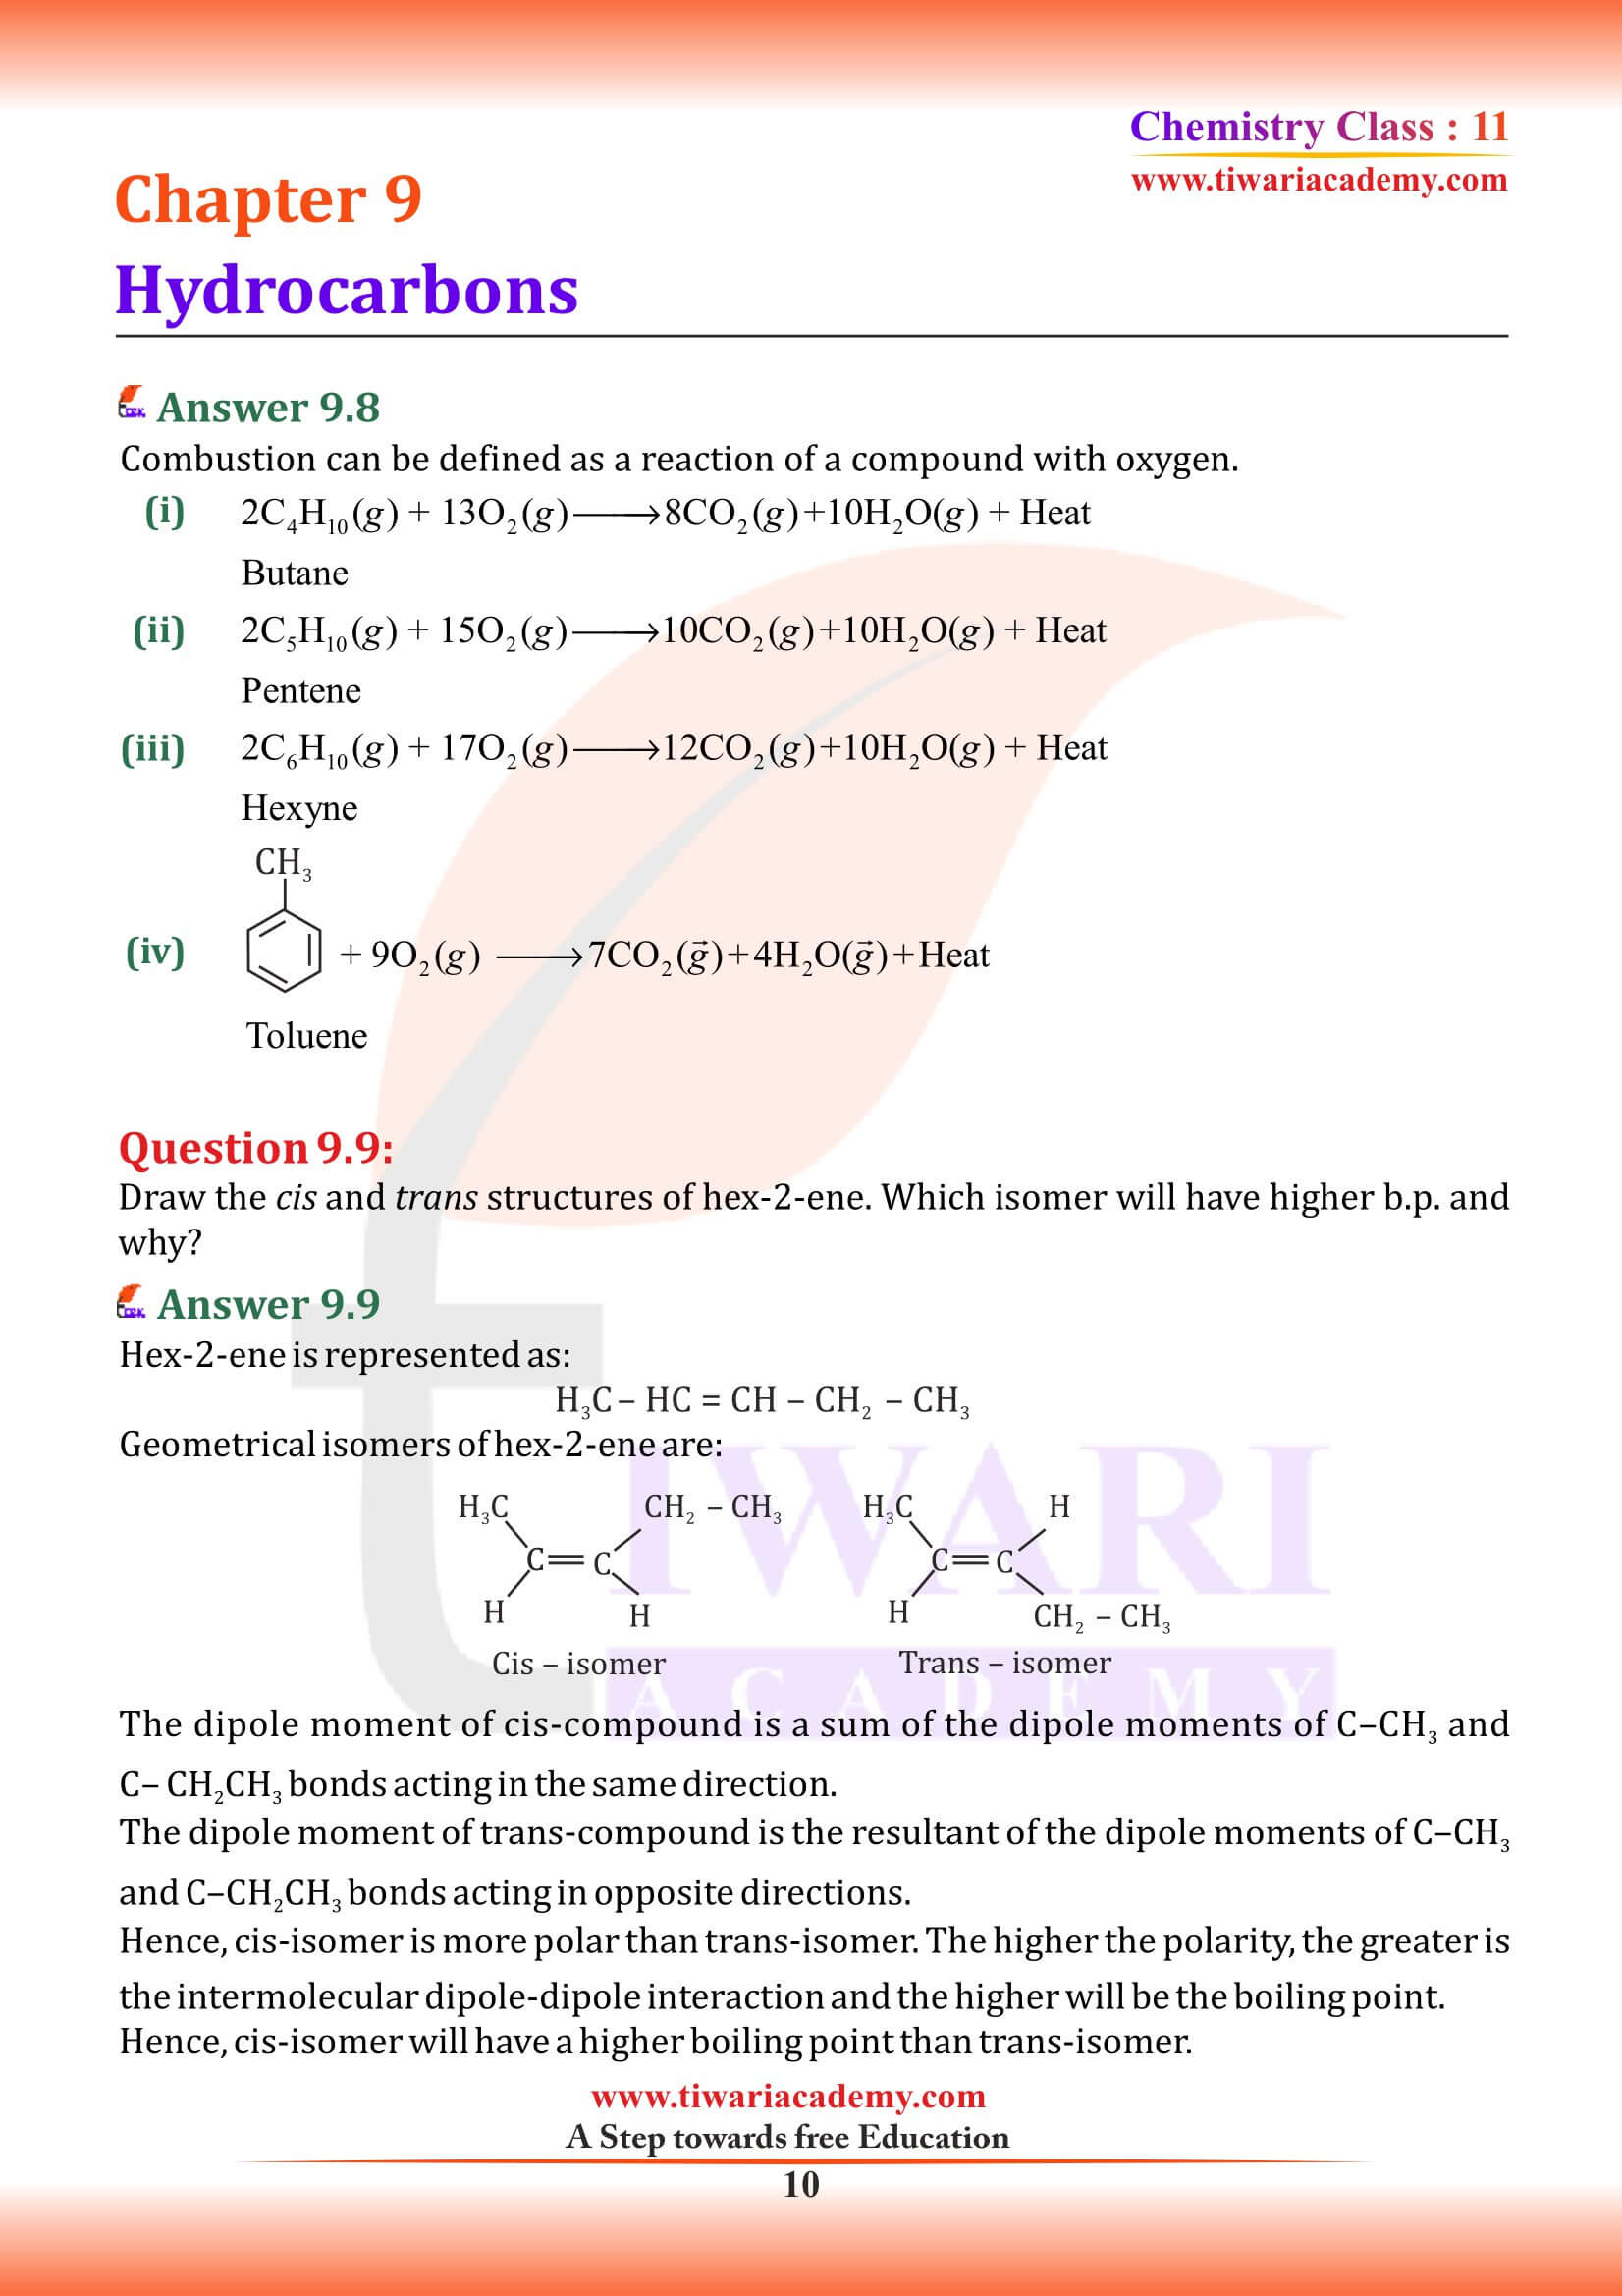 NCERT Class 11 Chemistry Chapter 9 answers